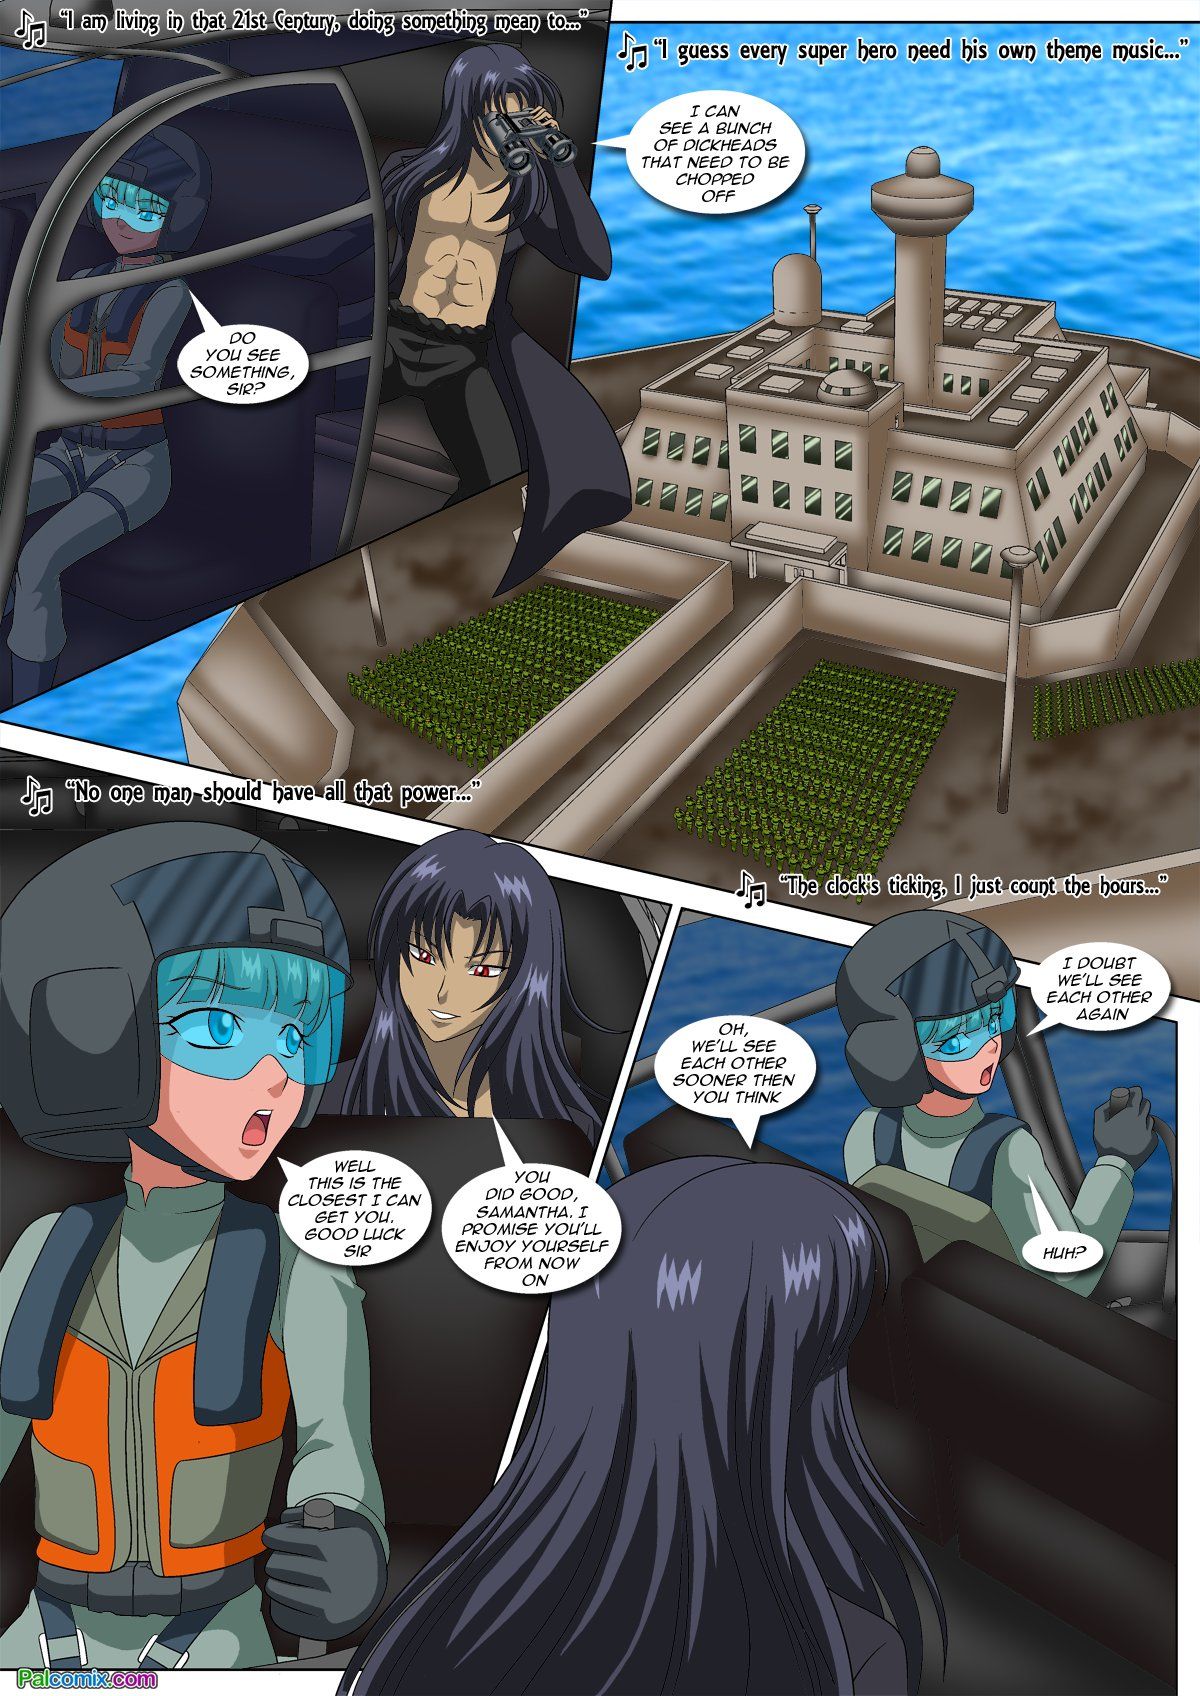 The Carnal Kingdom 6 - Angels and Demons page 47